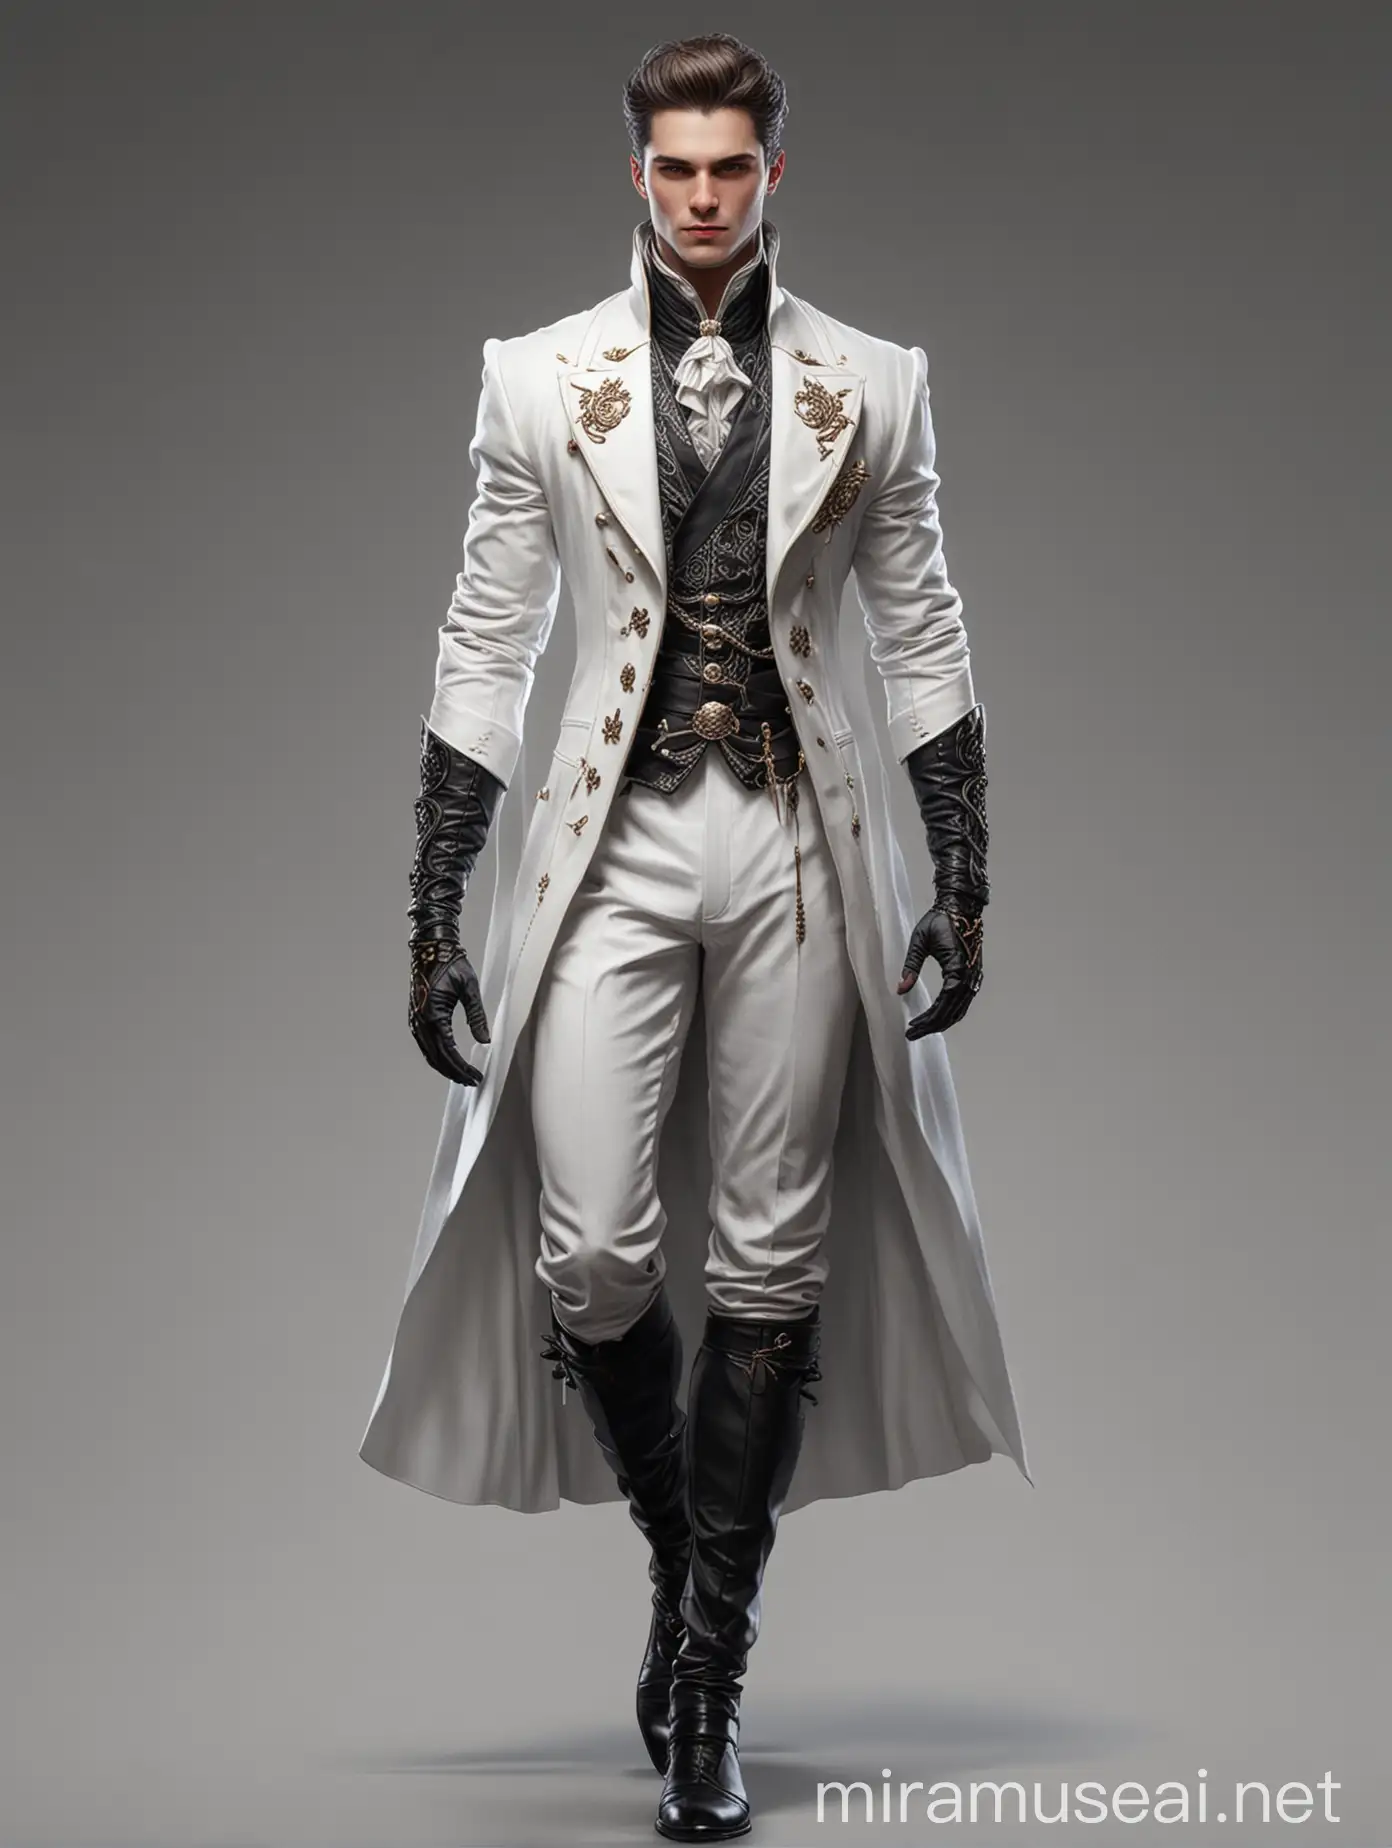 Elegant Male Fantasy Character in Royal White and Black Outfit